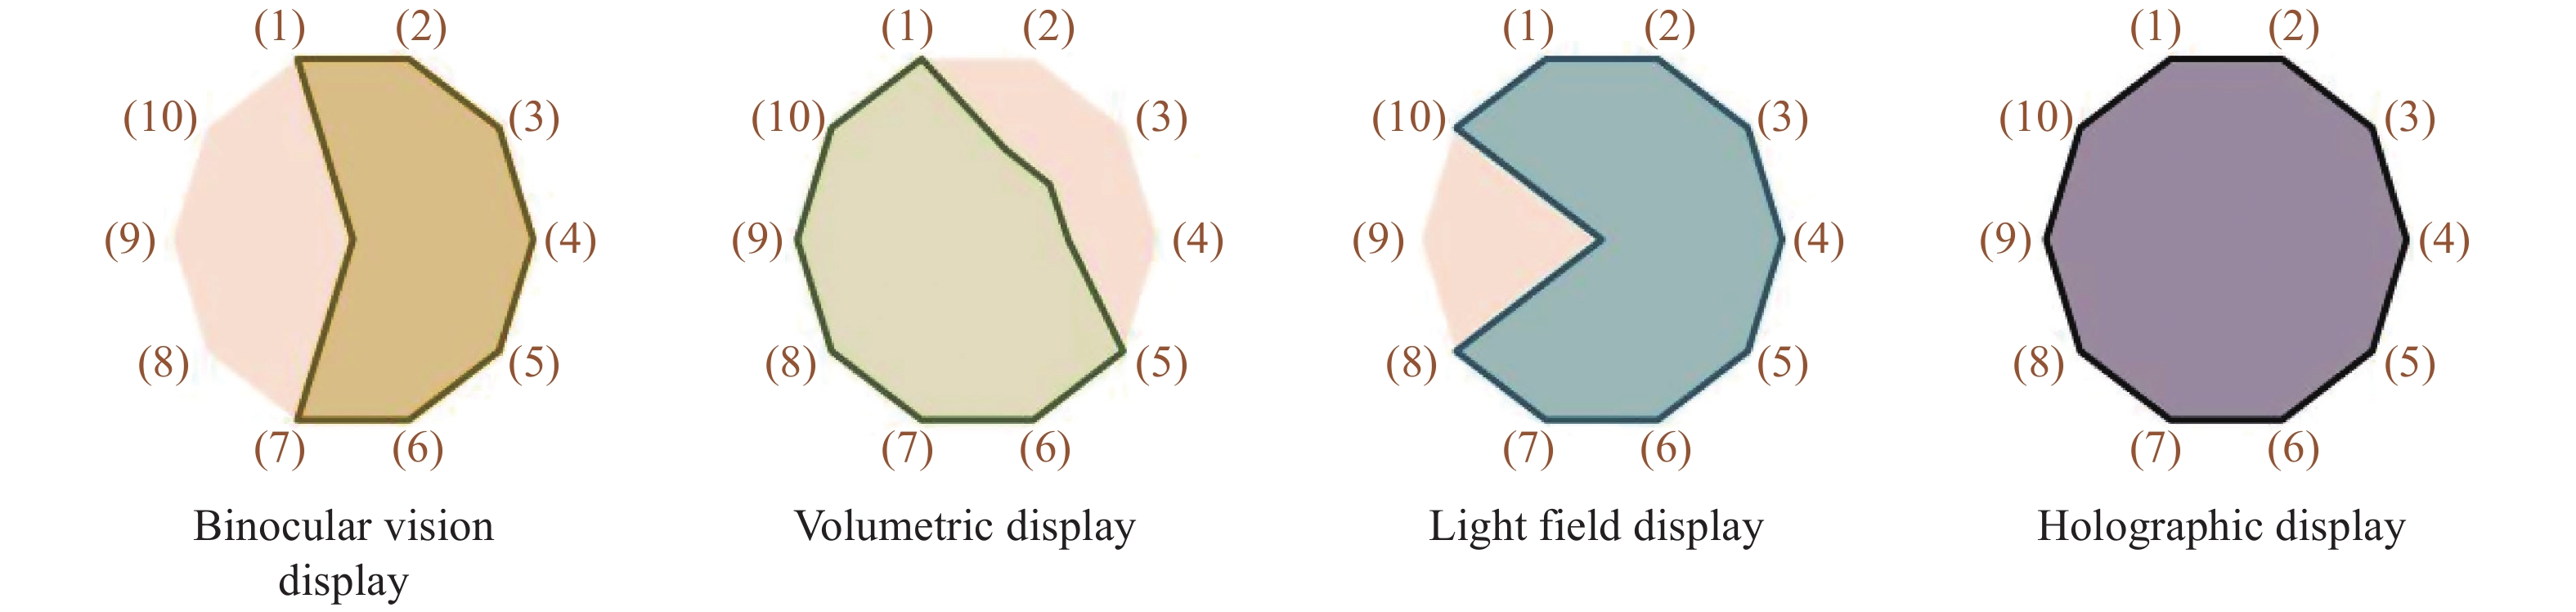 Depth cues provided by different 3D display technologies